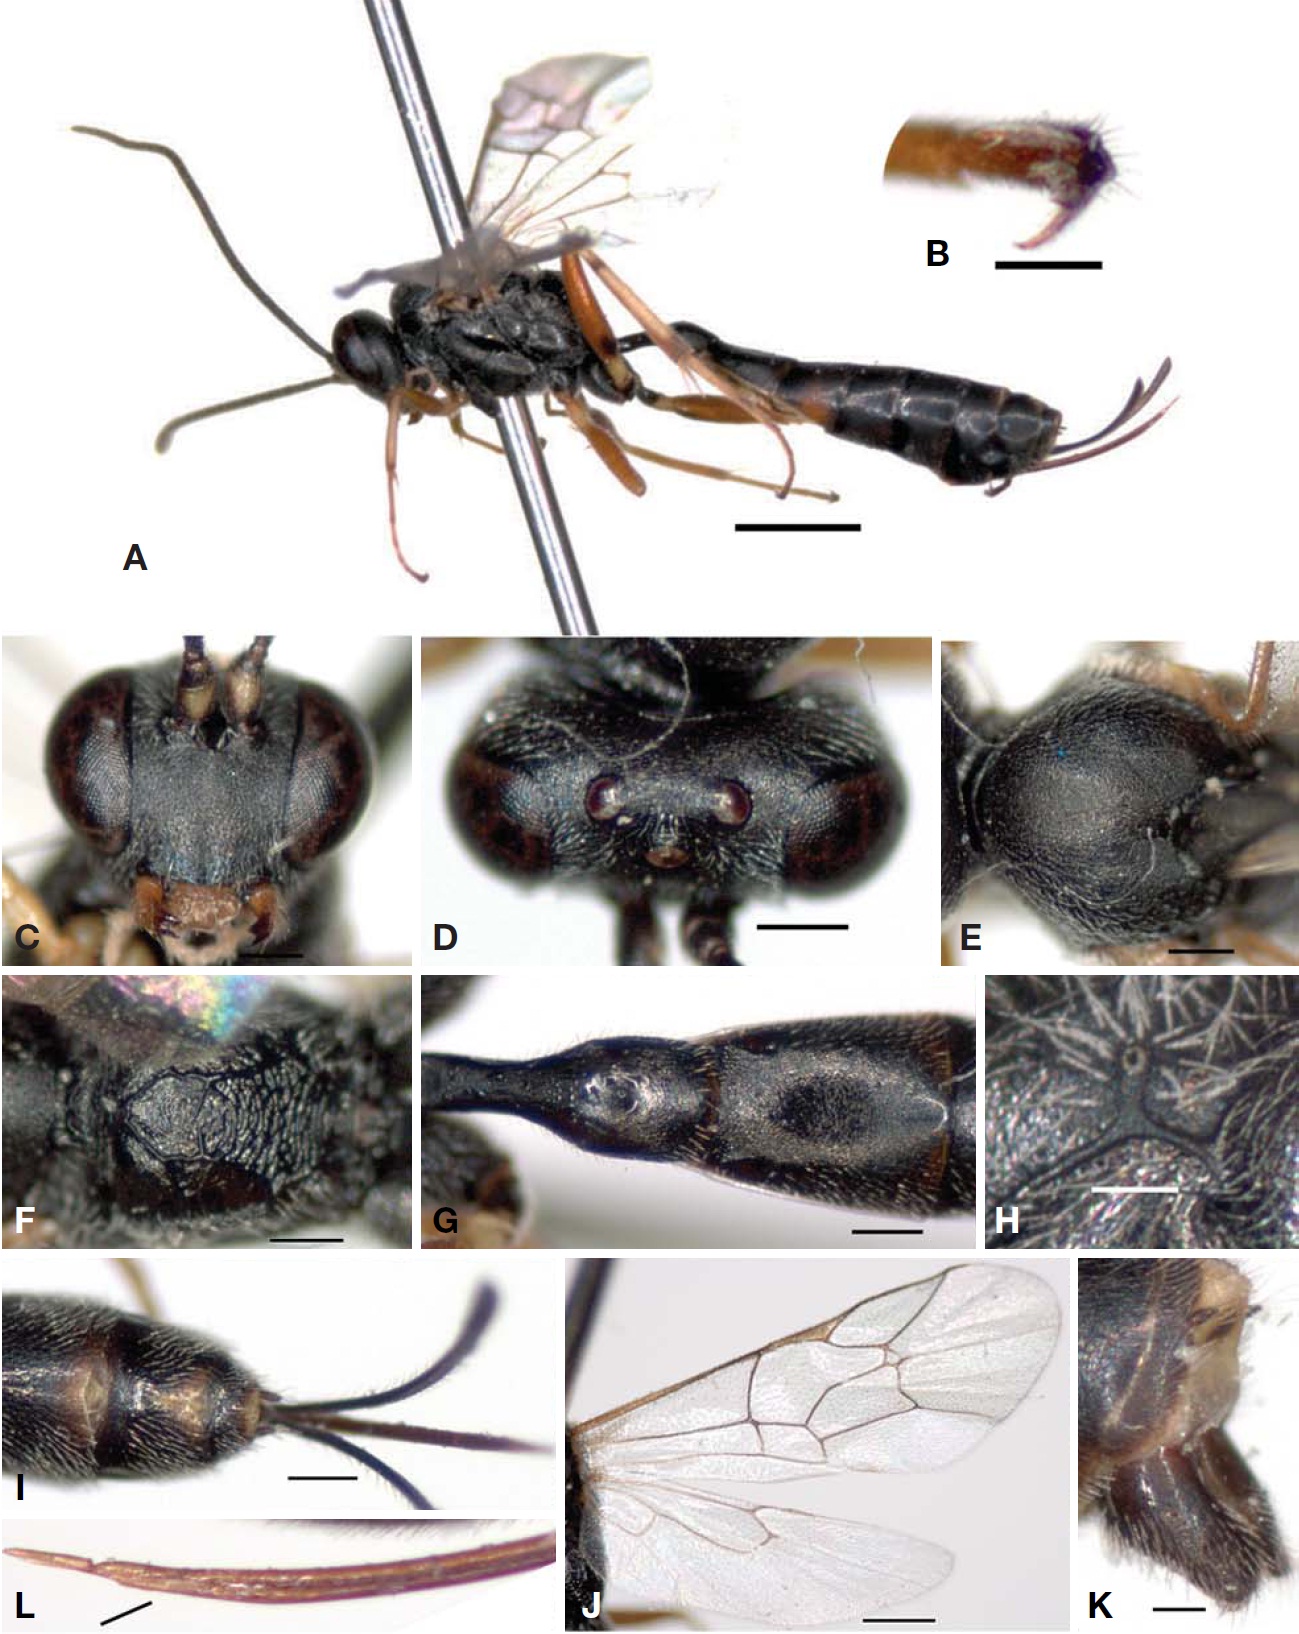 Diadegma fenestrale (Holmgren, 1860) (A-J, L, female). A, Habitus; B, Hind tarsal claw; C, Head in frontal; D, Head in dorsal; E, Scutum; F, Propodeum; G, First and second tergites; H, Propodeal spiracle; I, 6-8 tergites; J, Wings; K, Clasper of male; L, Ovipositor. Scale bars: A=1 mm, B, H, K, L=0.1 mm, C-G, I=0.2 mm, J=0.5mm